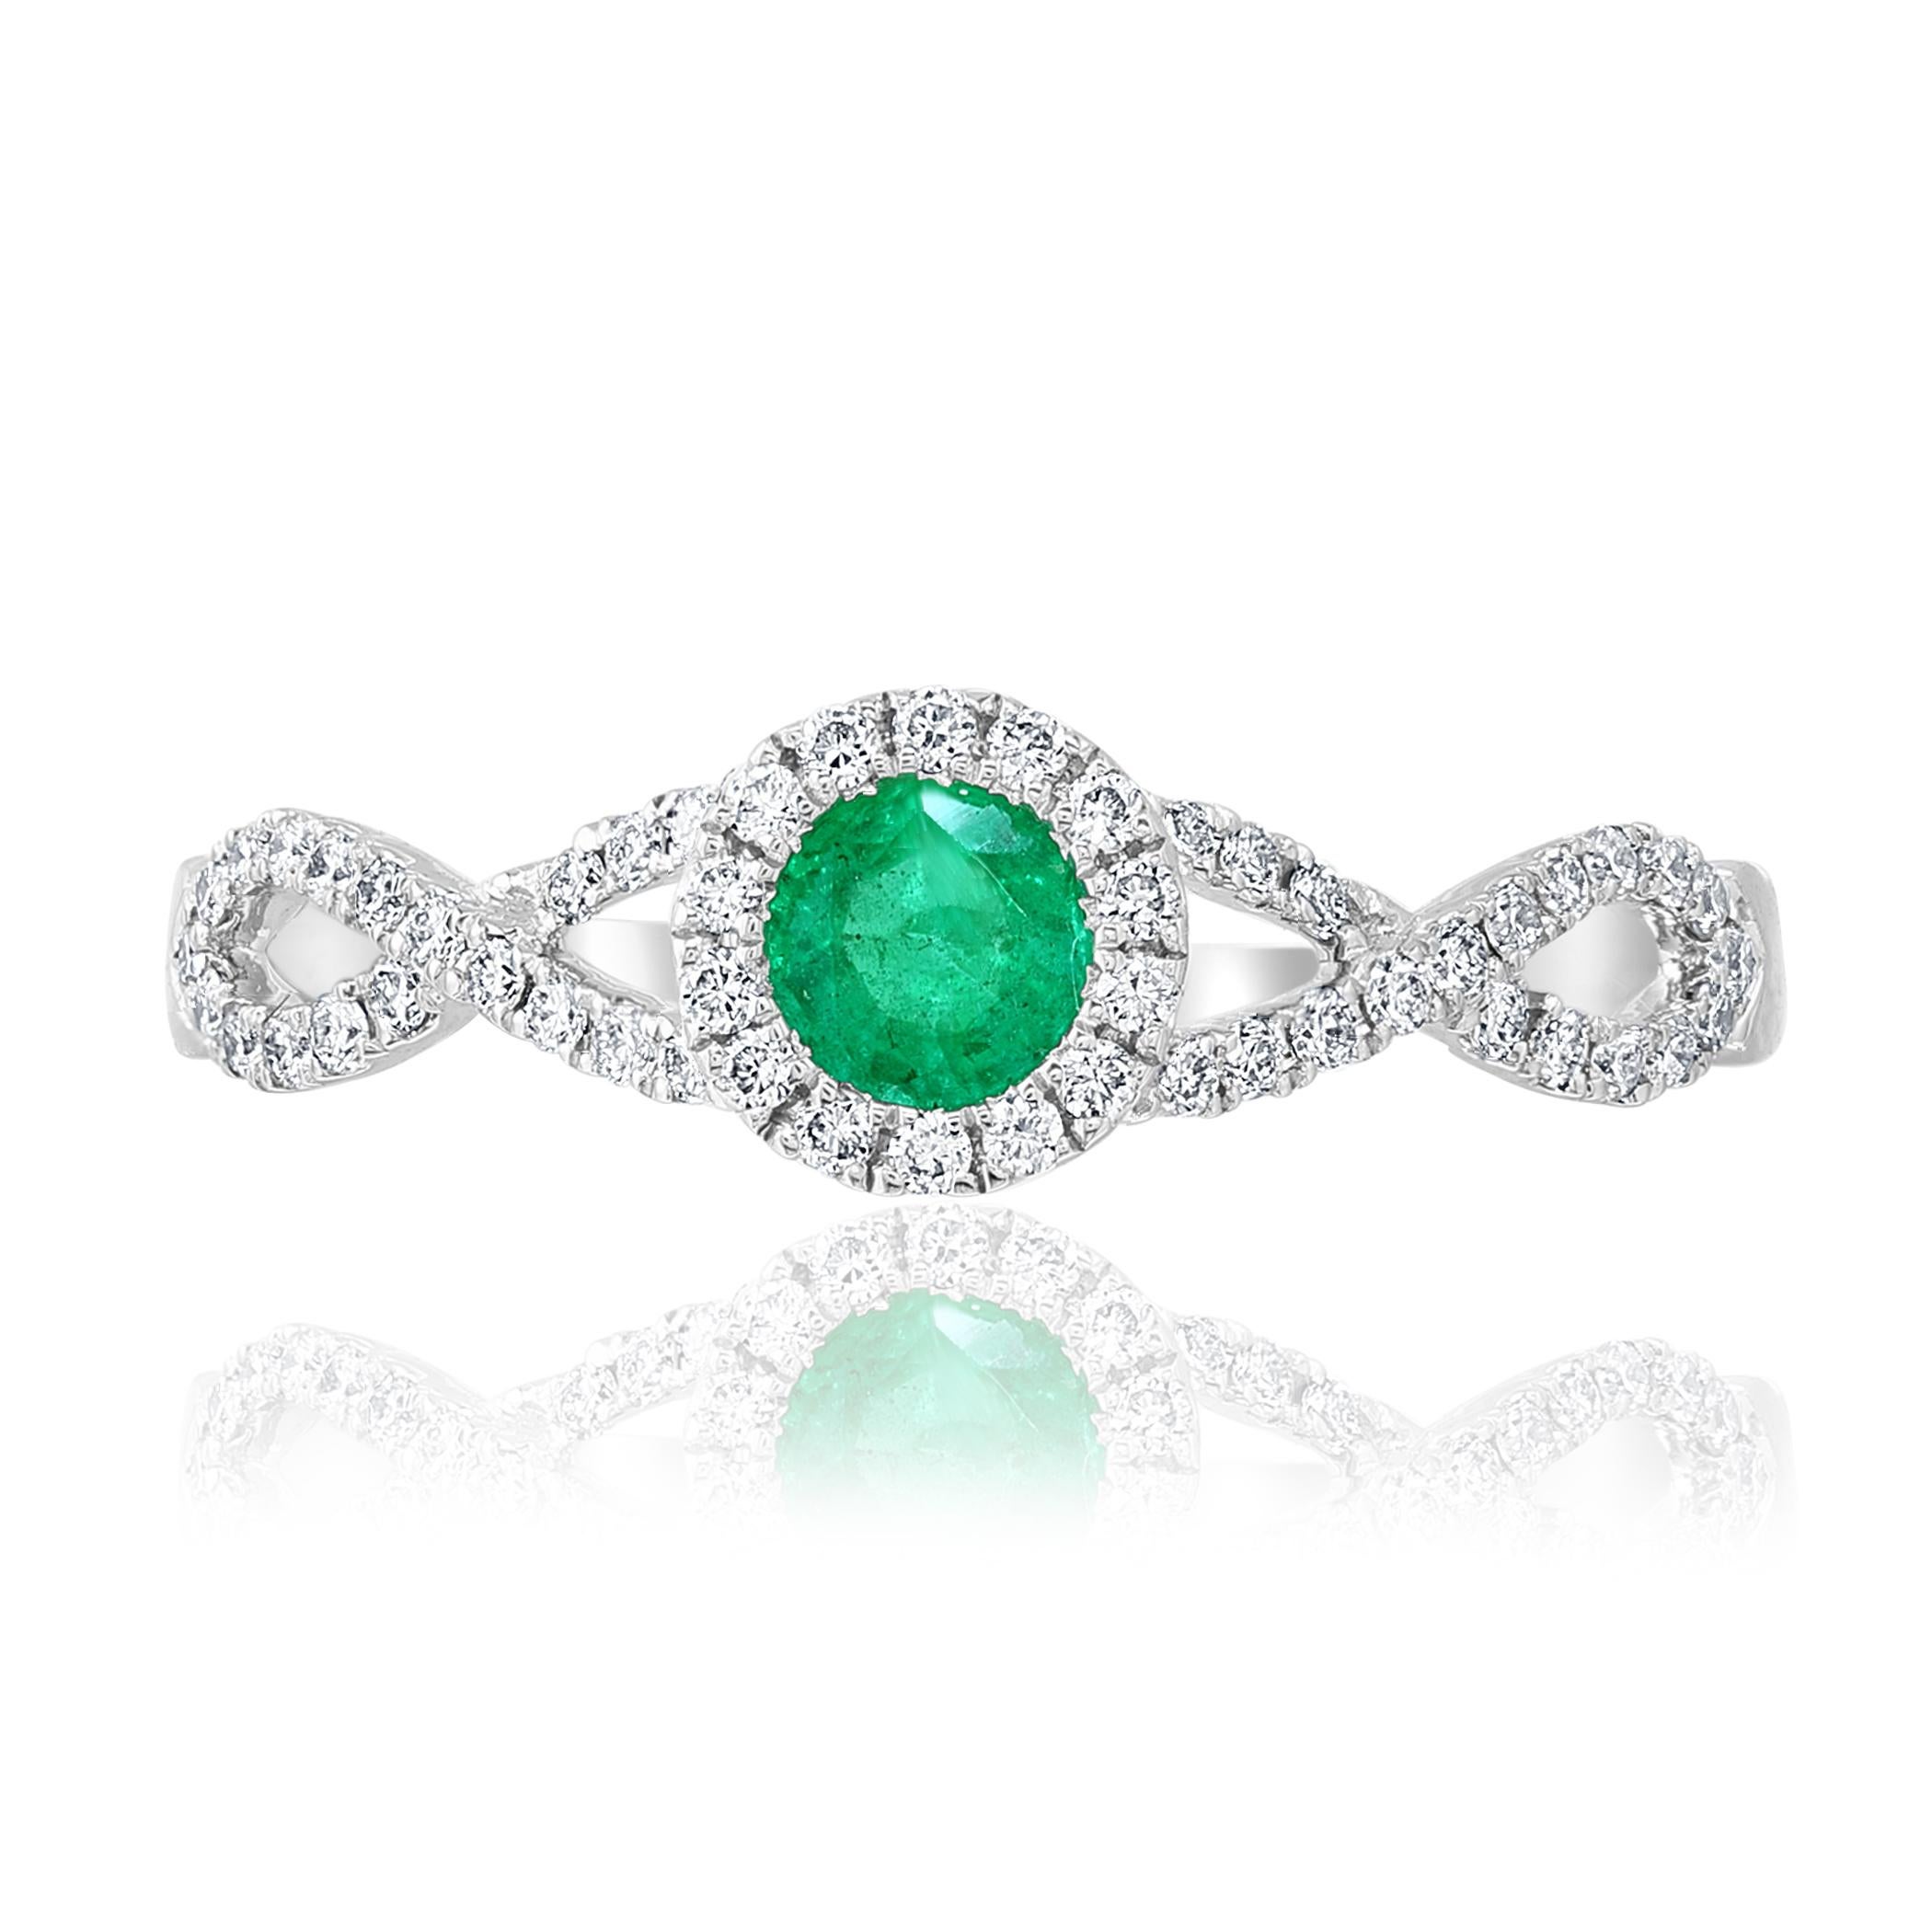 A unique and chic piece of jewelry showcasing a gorgeous 0.25 carat round emerald  center stone that securely sit in a 4 prong setting. Surrounding the sapphire is a halo of round brilliant diamonds. Creative 14k white gold intertwined split 